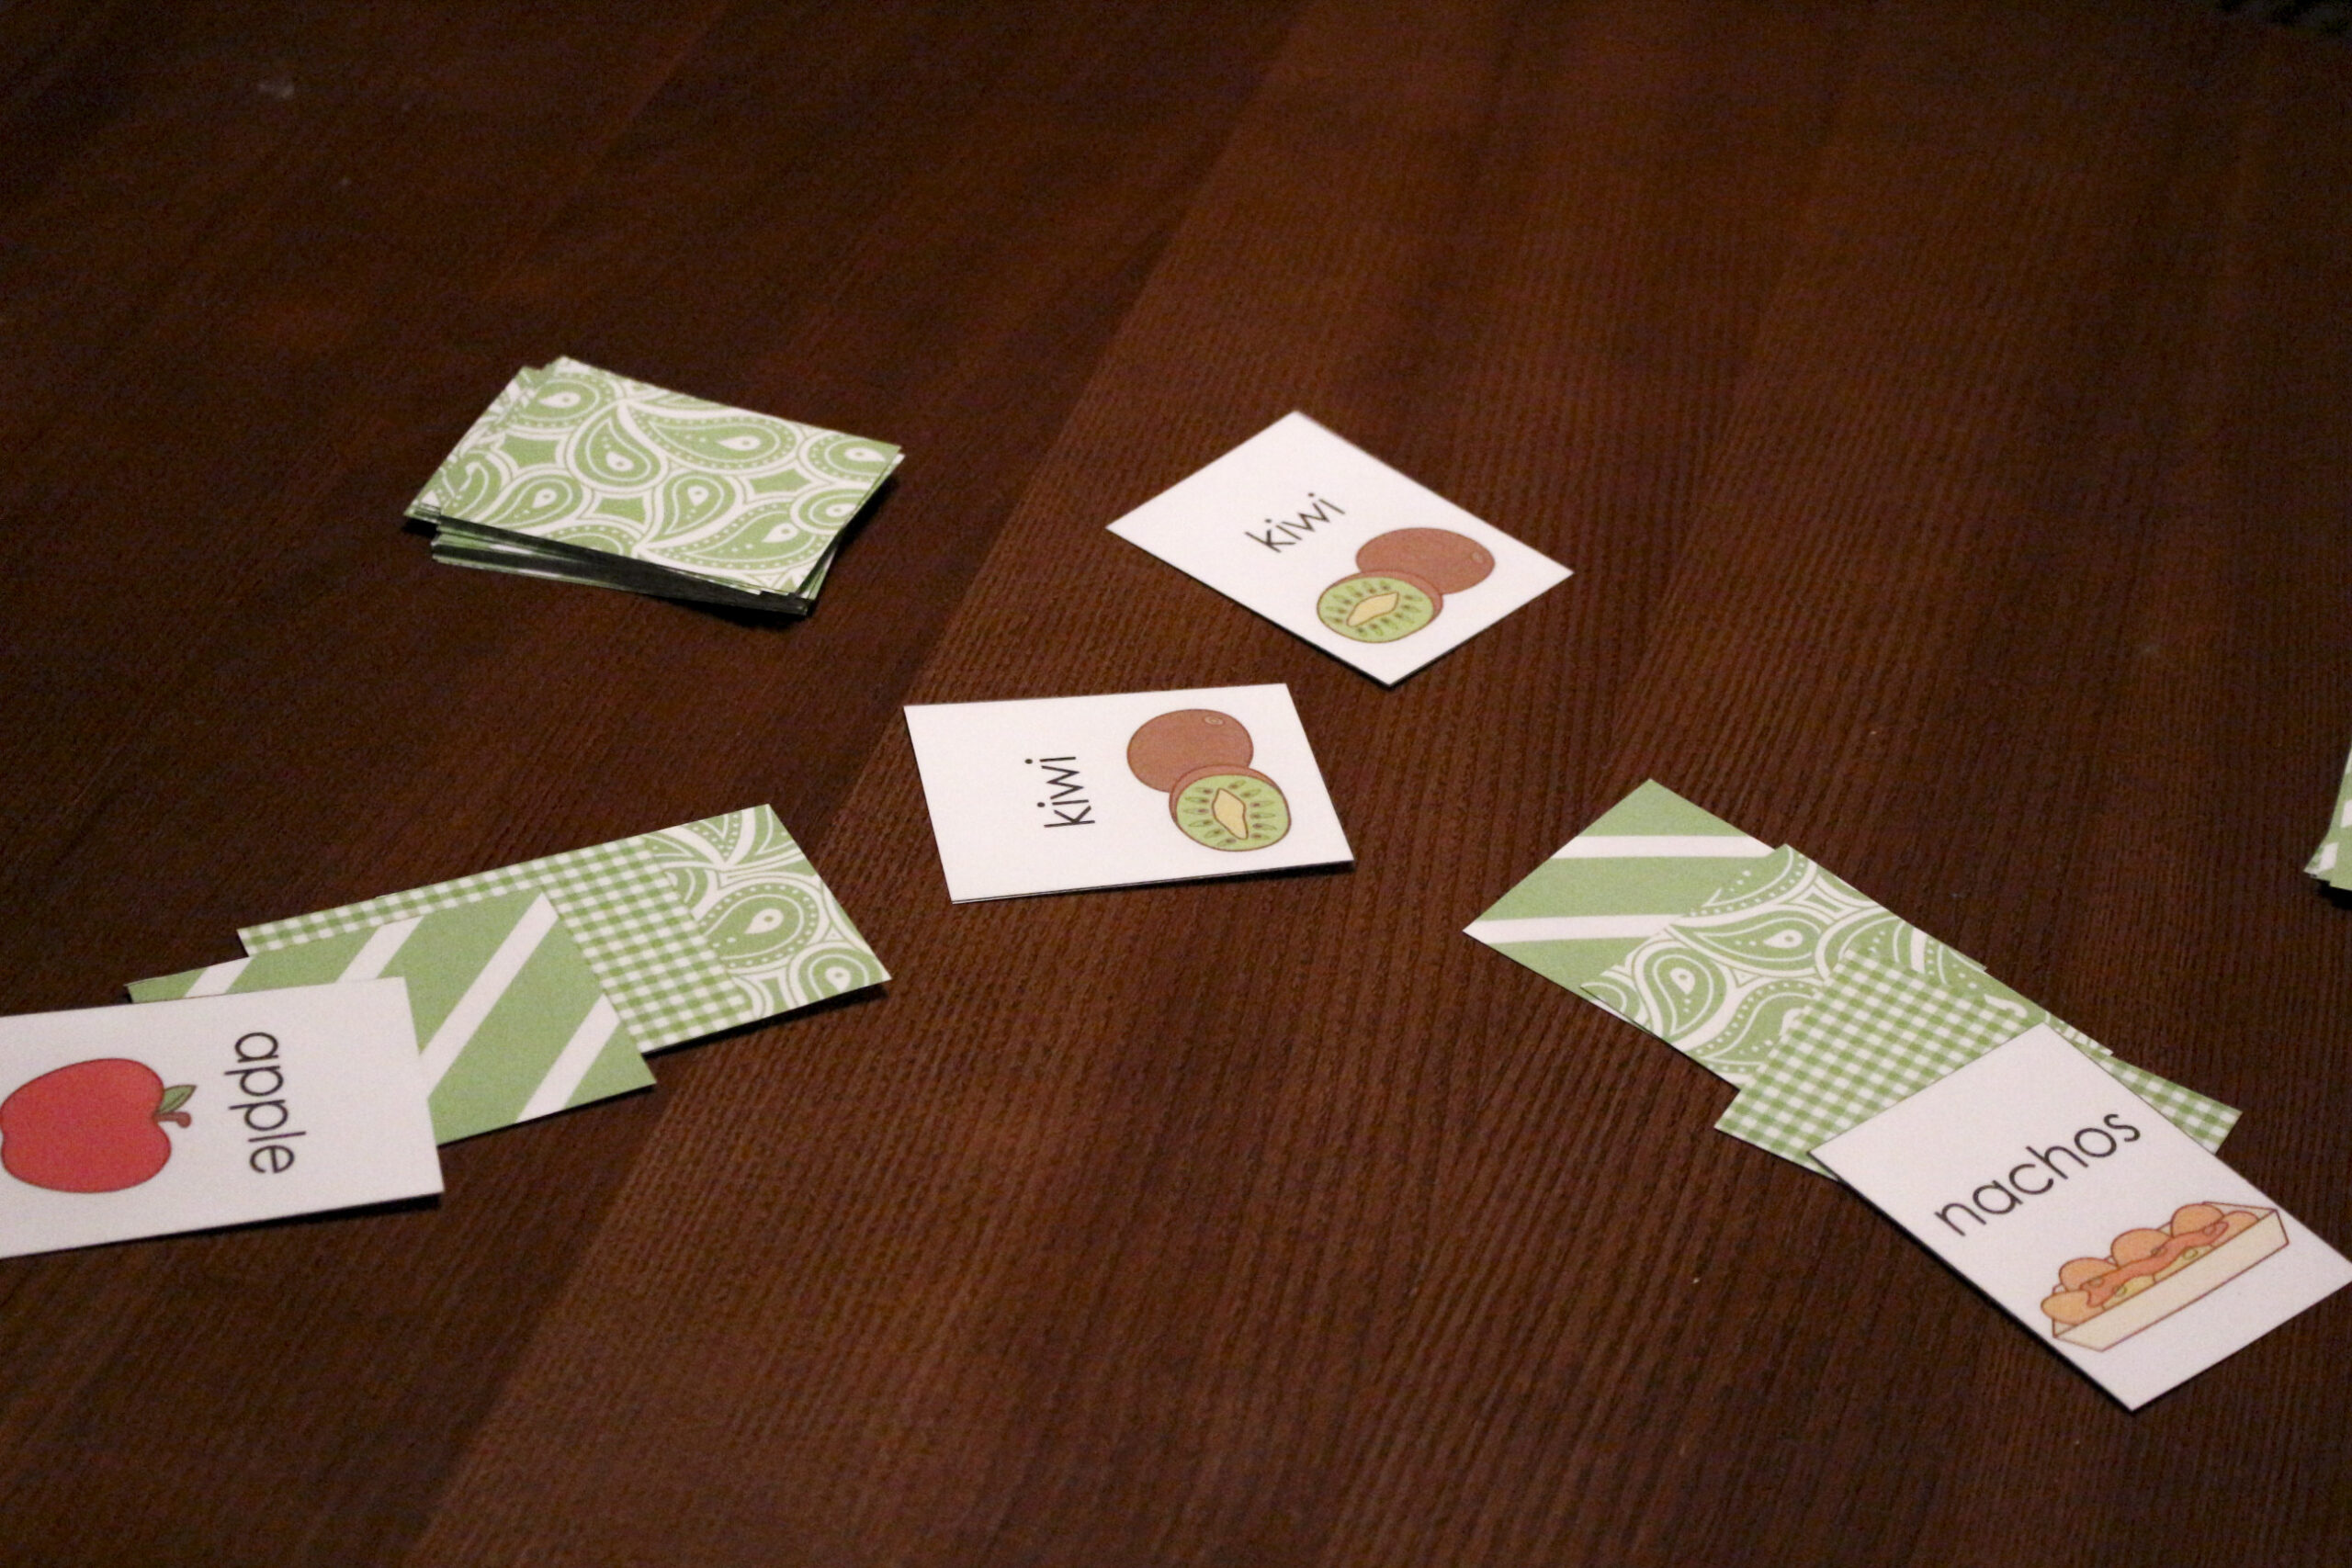 Use the food alphabetical order cards to play a two person card game.